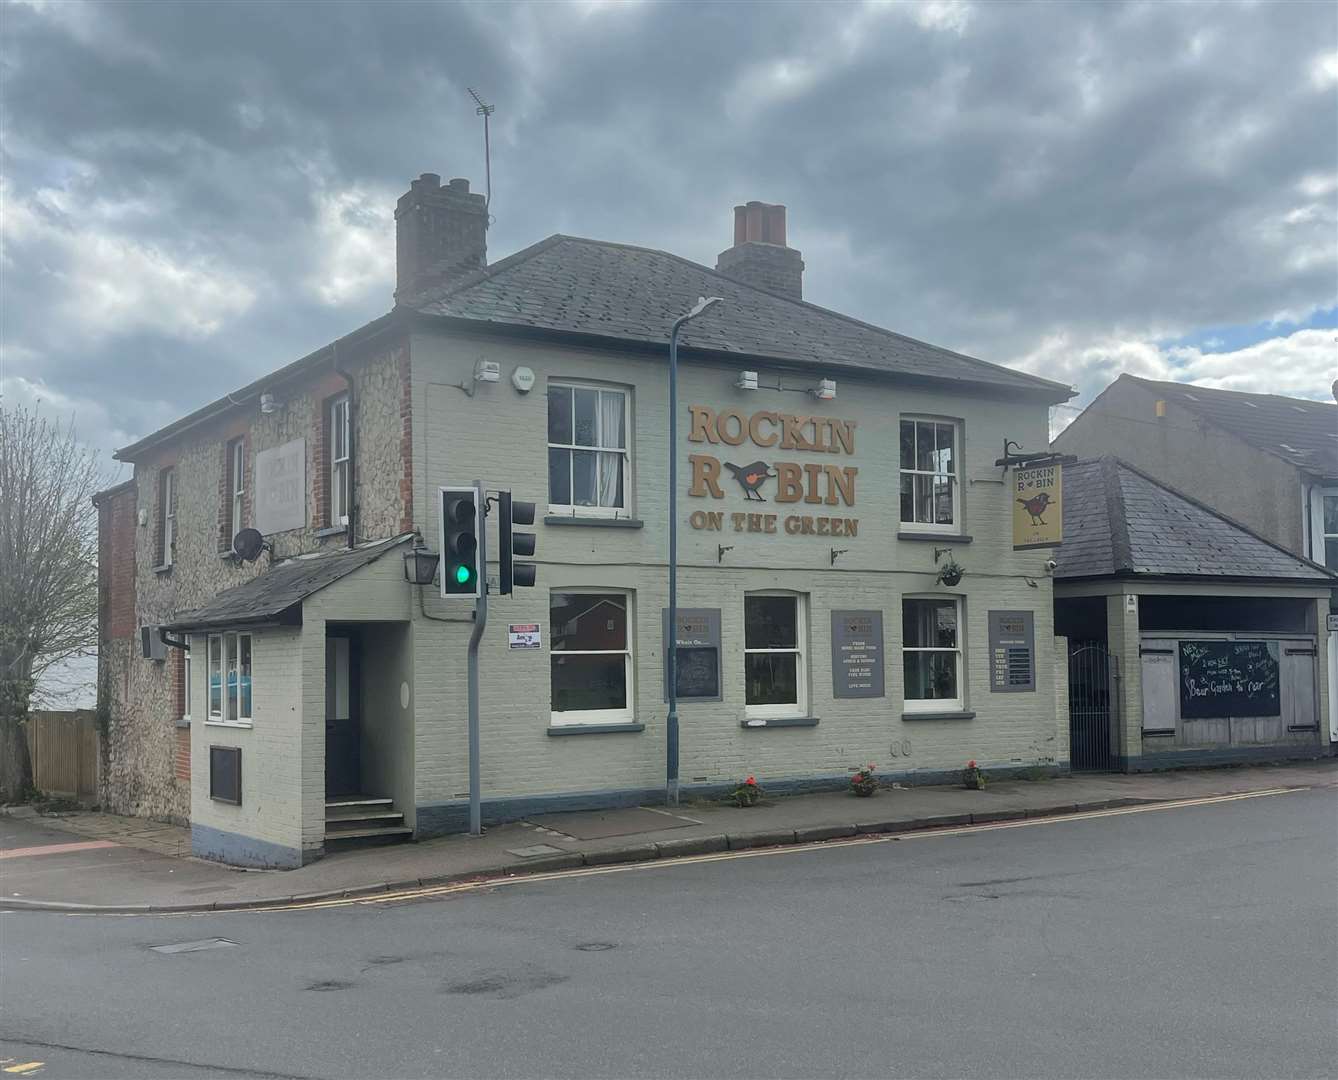 The Rockin Robin on the Green is reopening tonight. Picture: Martin Goodman